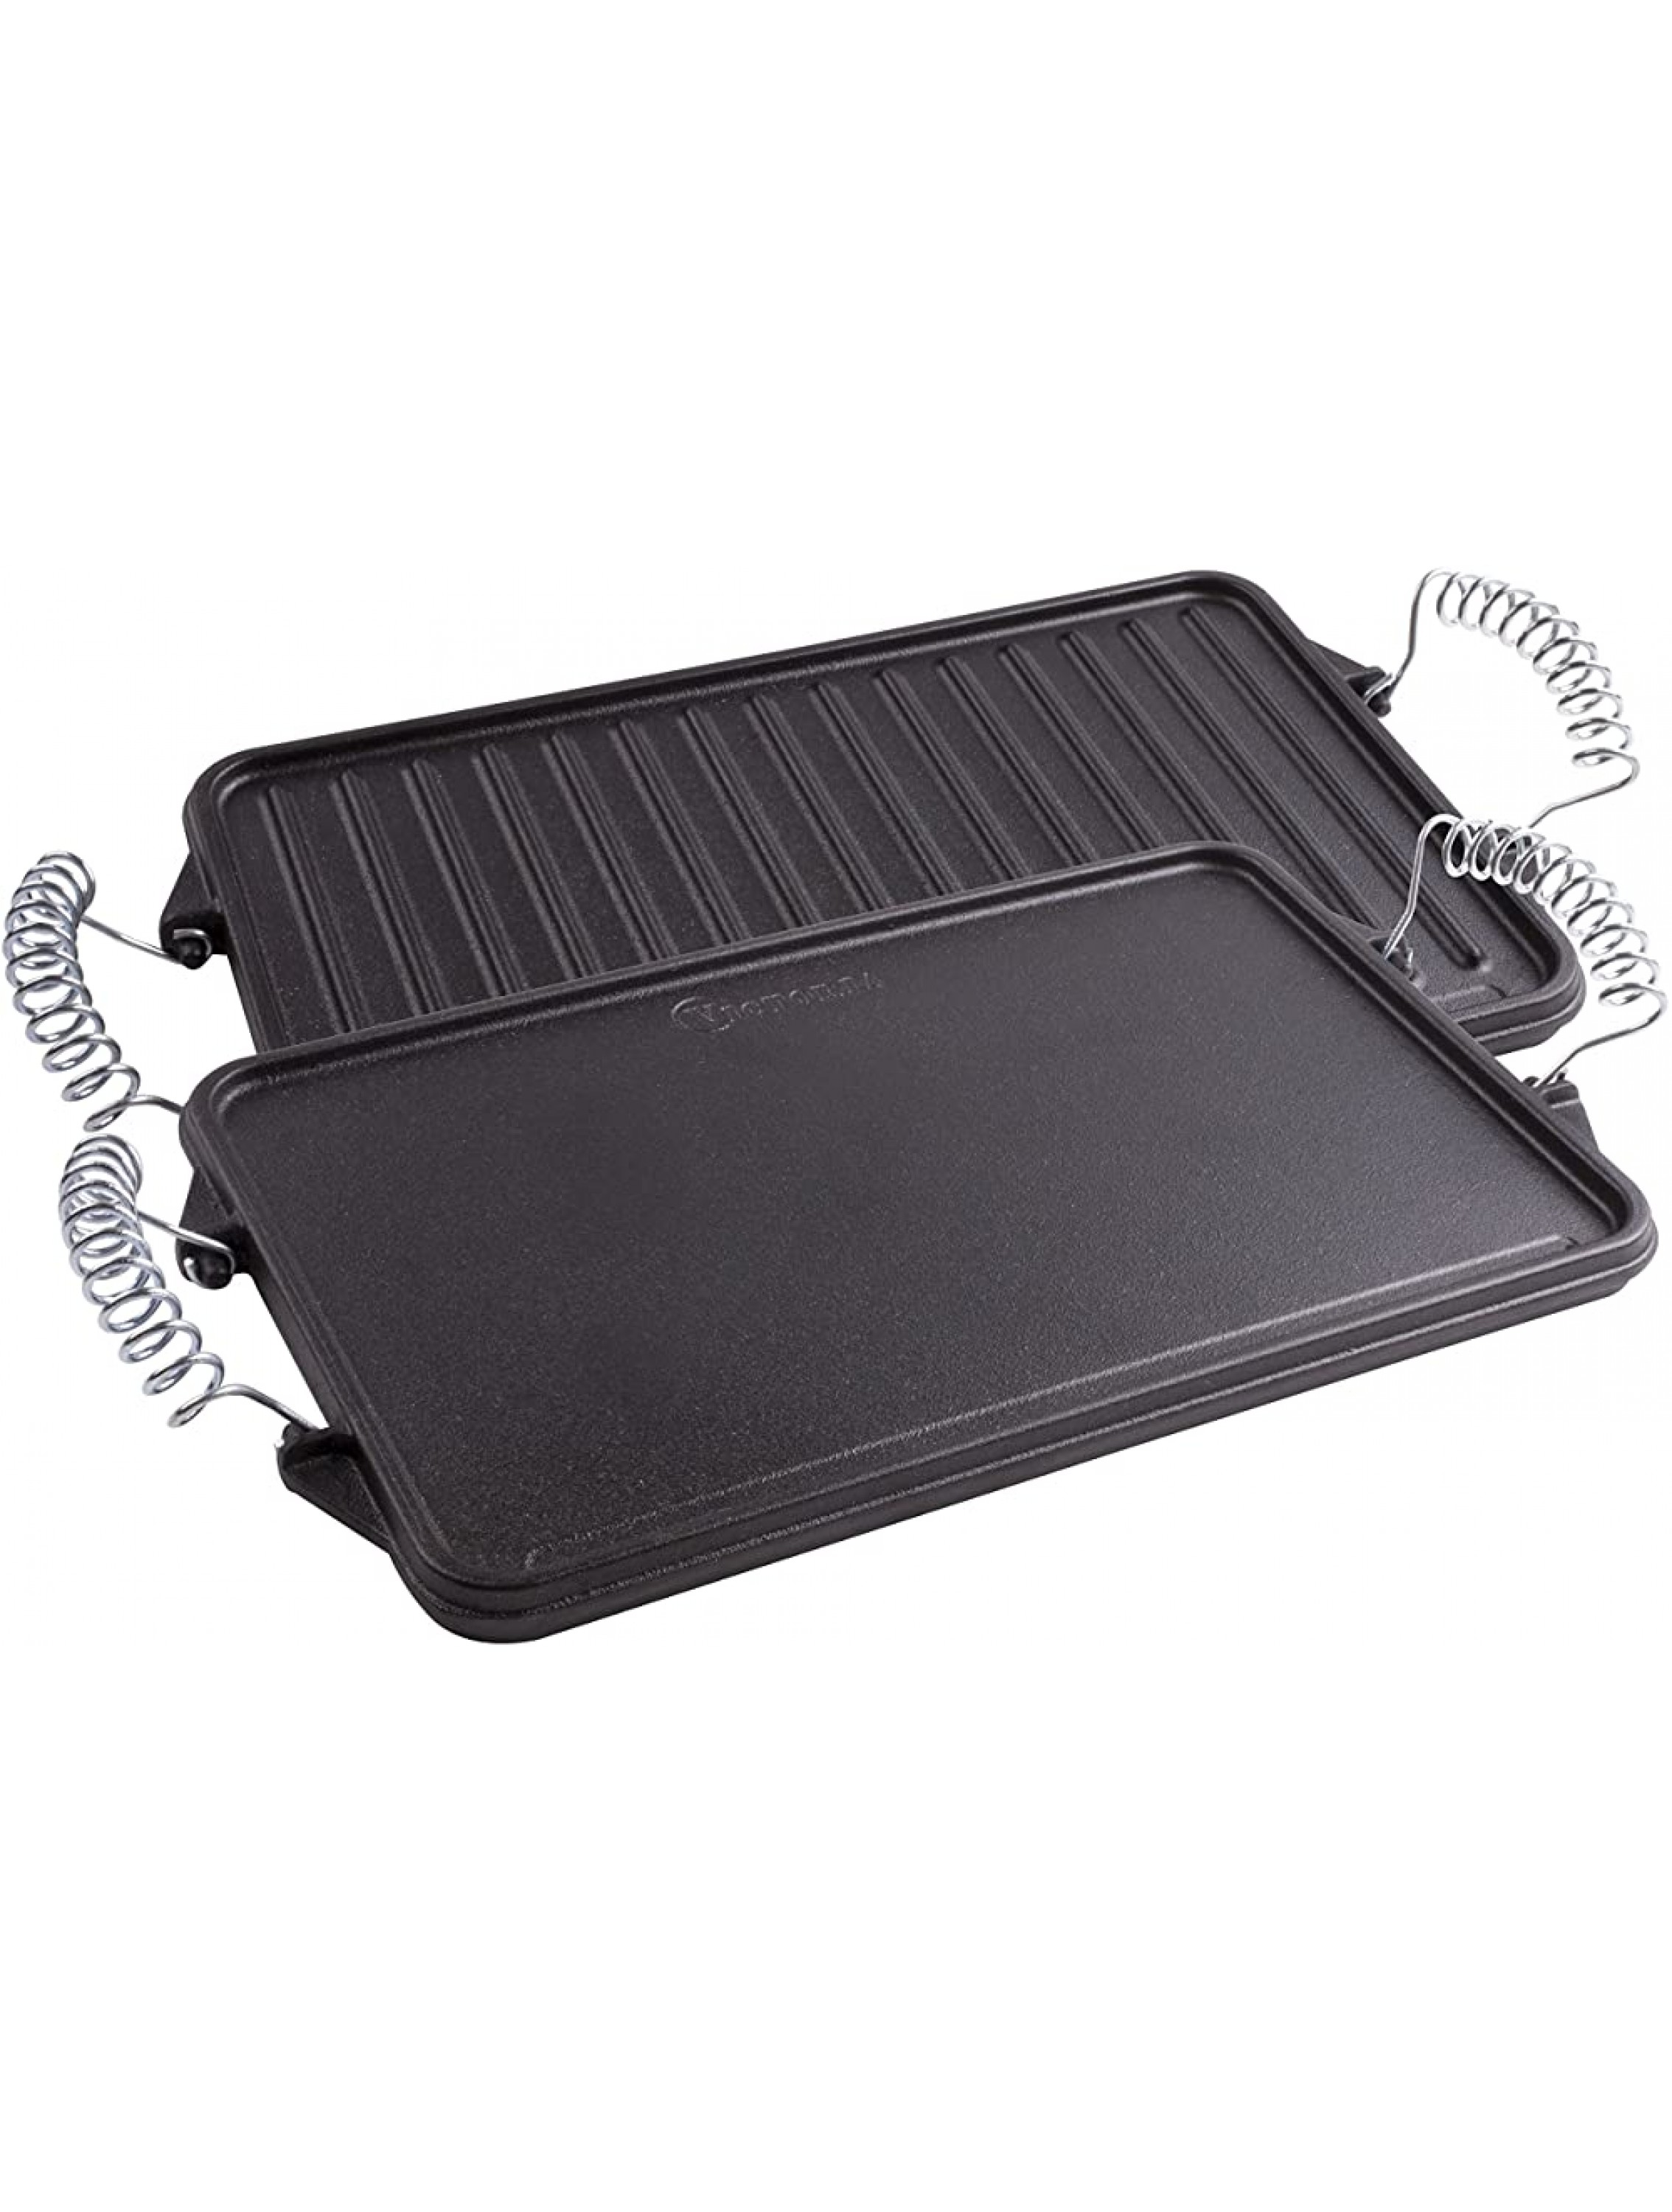 Victoria Cast Iron Grill. Double Burner Griddle with Removable Wire Handles Seasoned with 100% Kosher Certified Non-GMO Flaxseed Oil 13 x 8 Inches Black - BVHRCIMFY